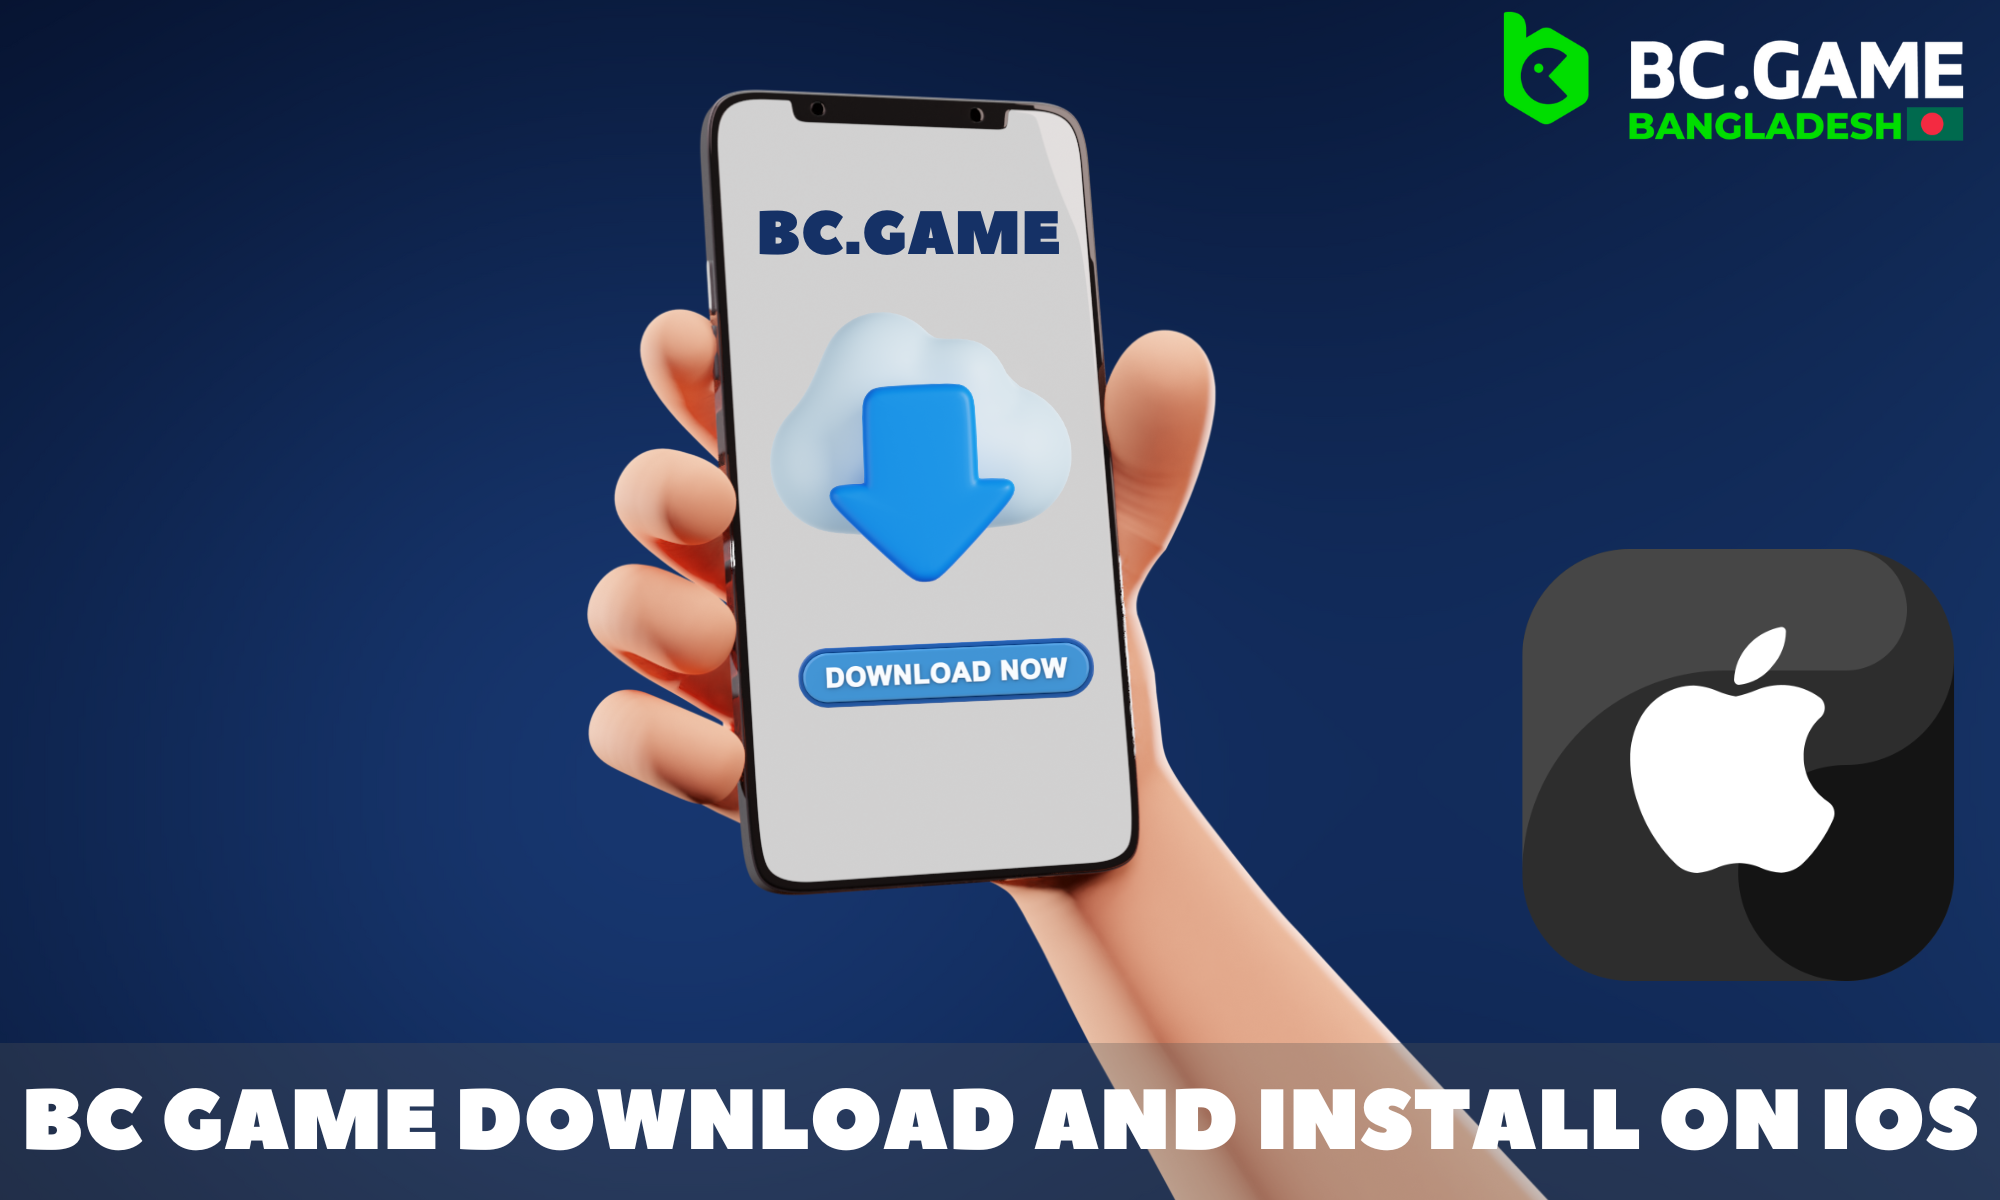 Detailed and step-by-step instructions on how to download and install the BC Game app on IOS